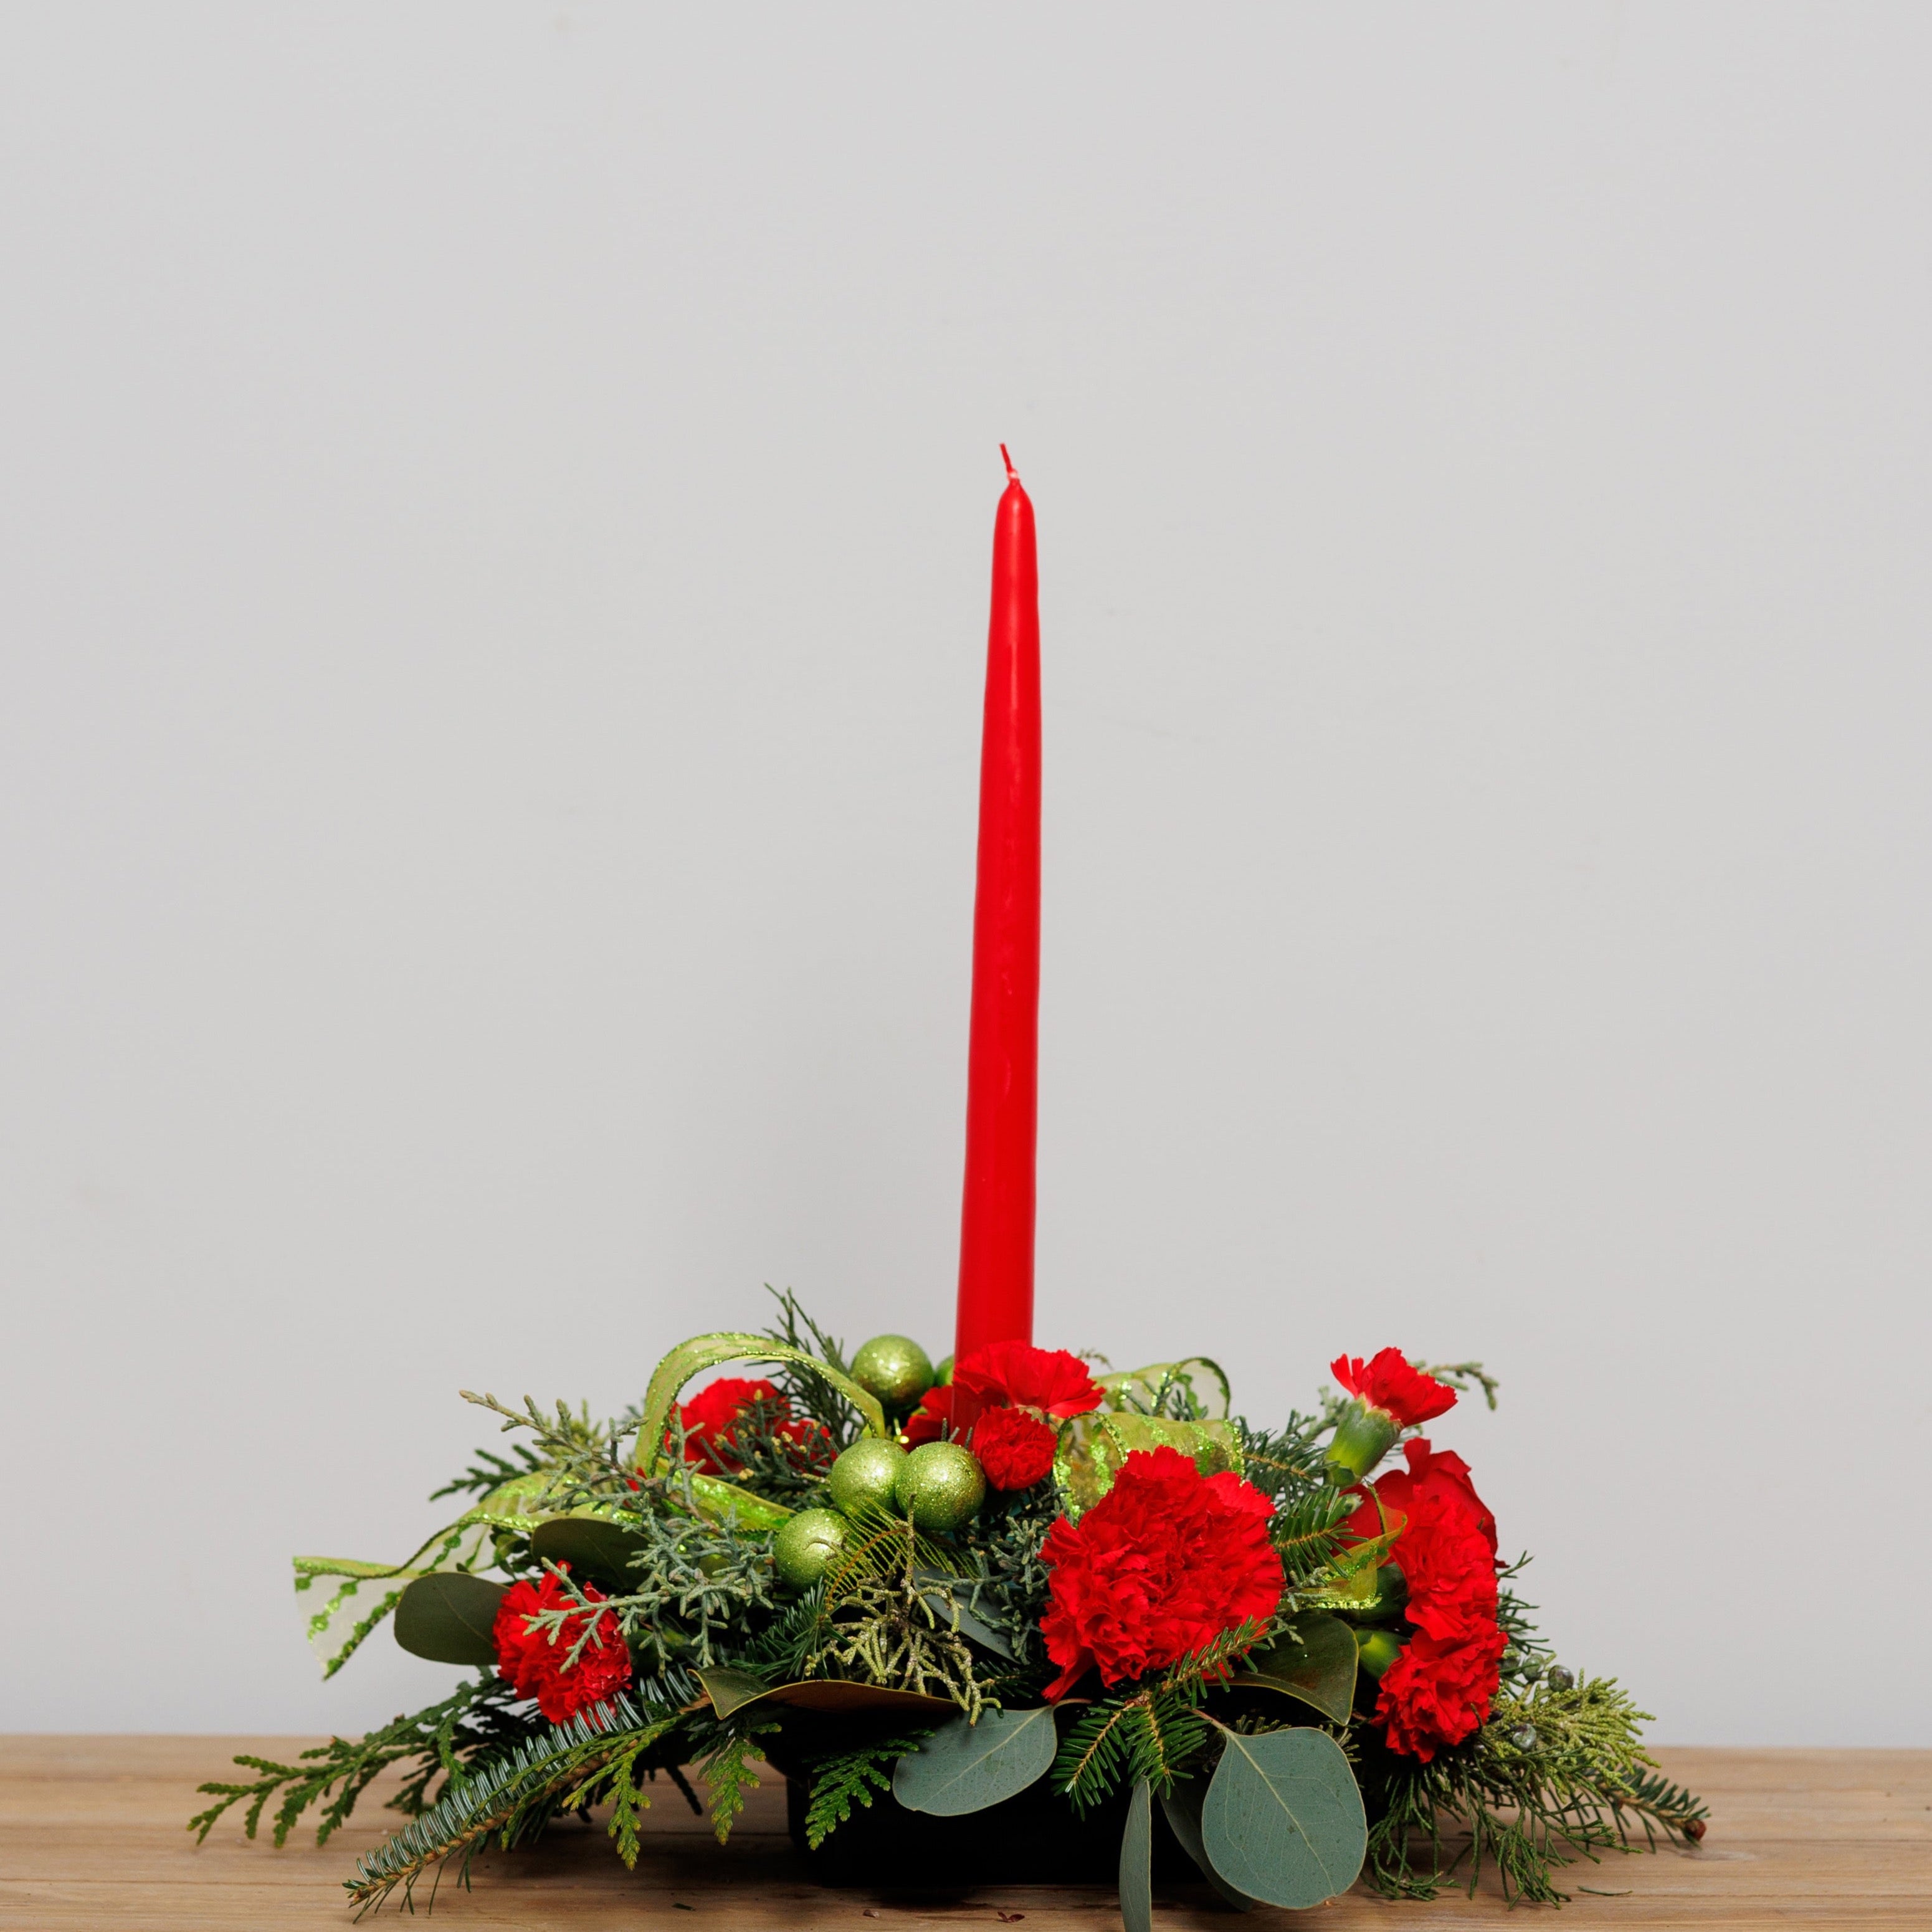 A red and lime green centerpiece with a single red candle.